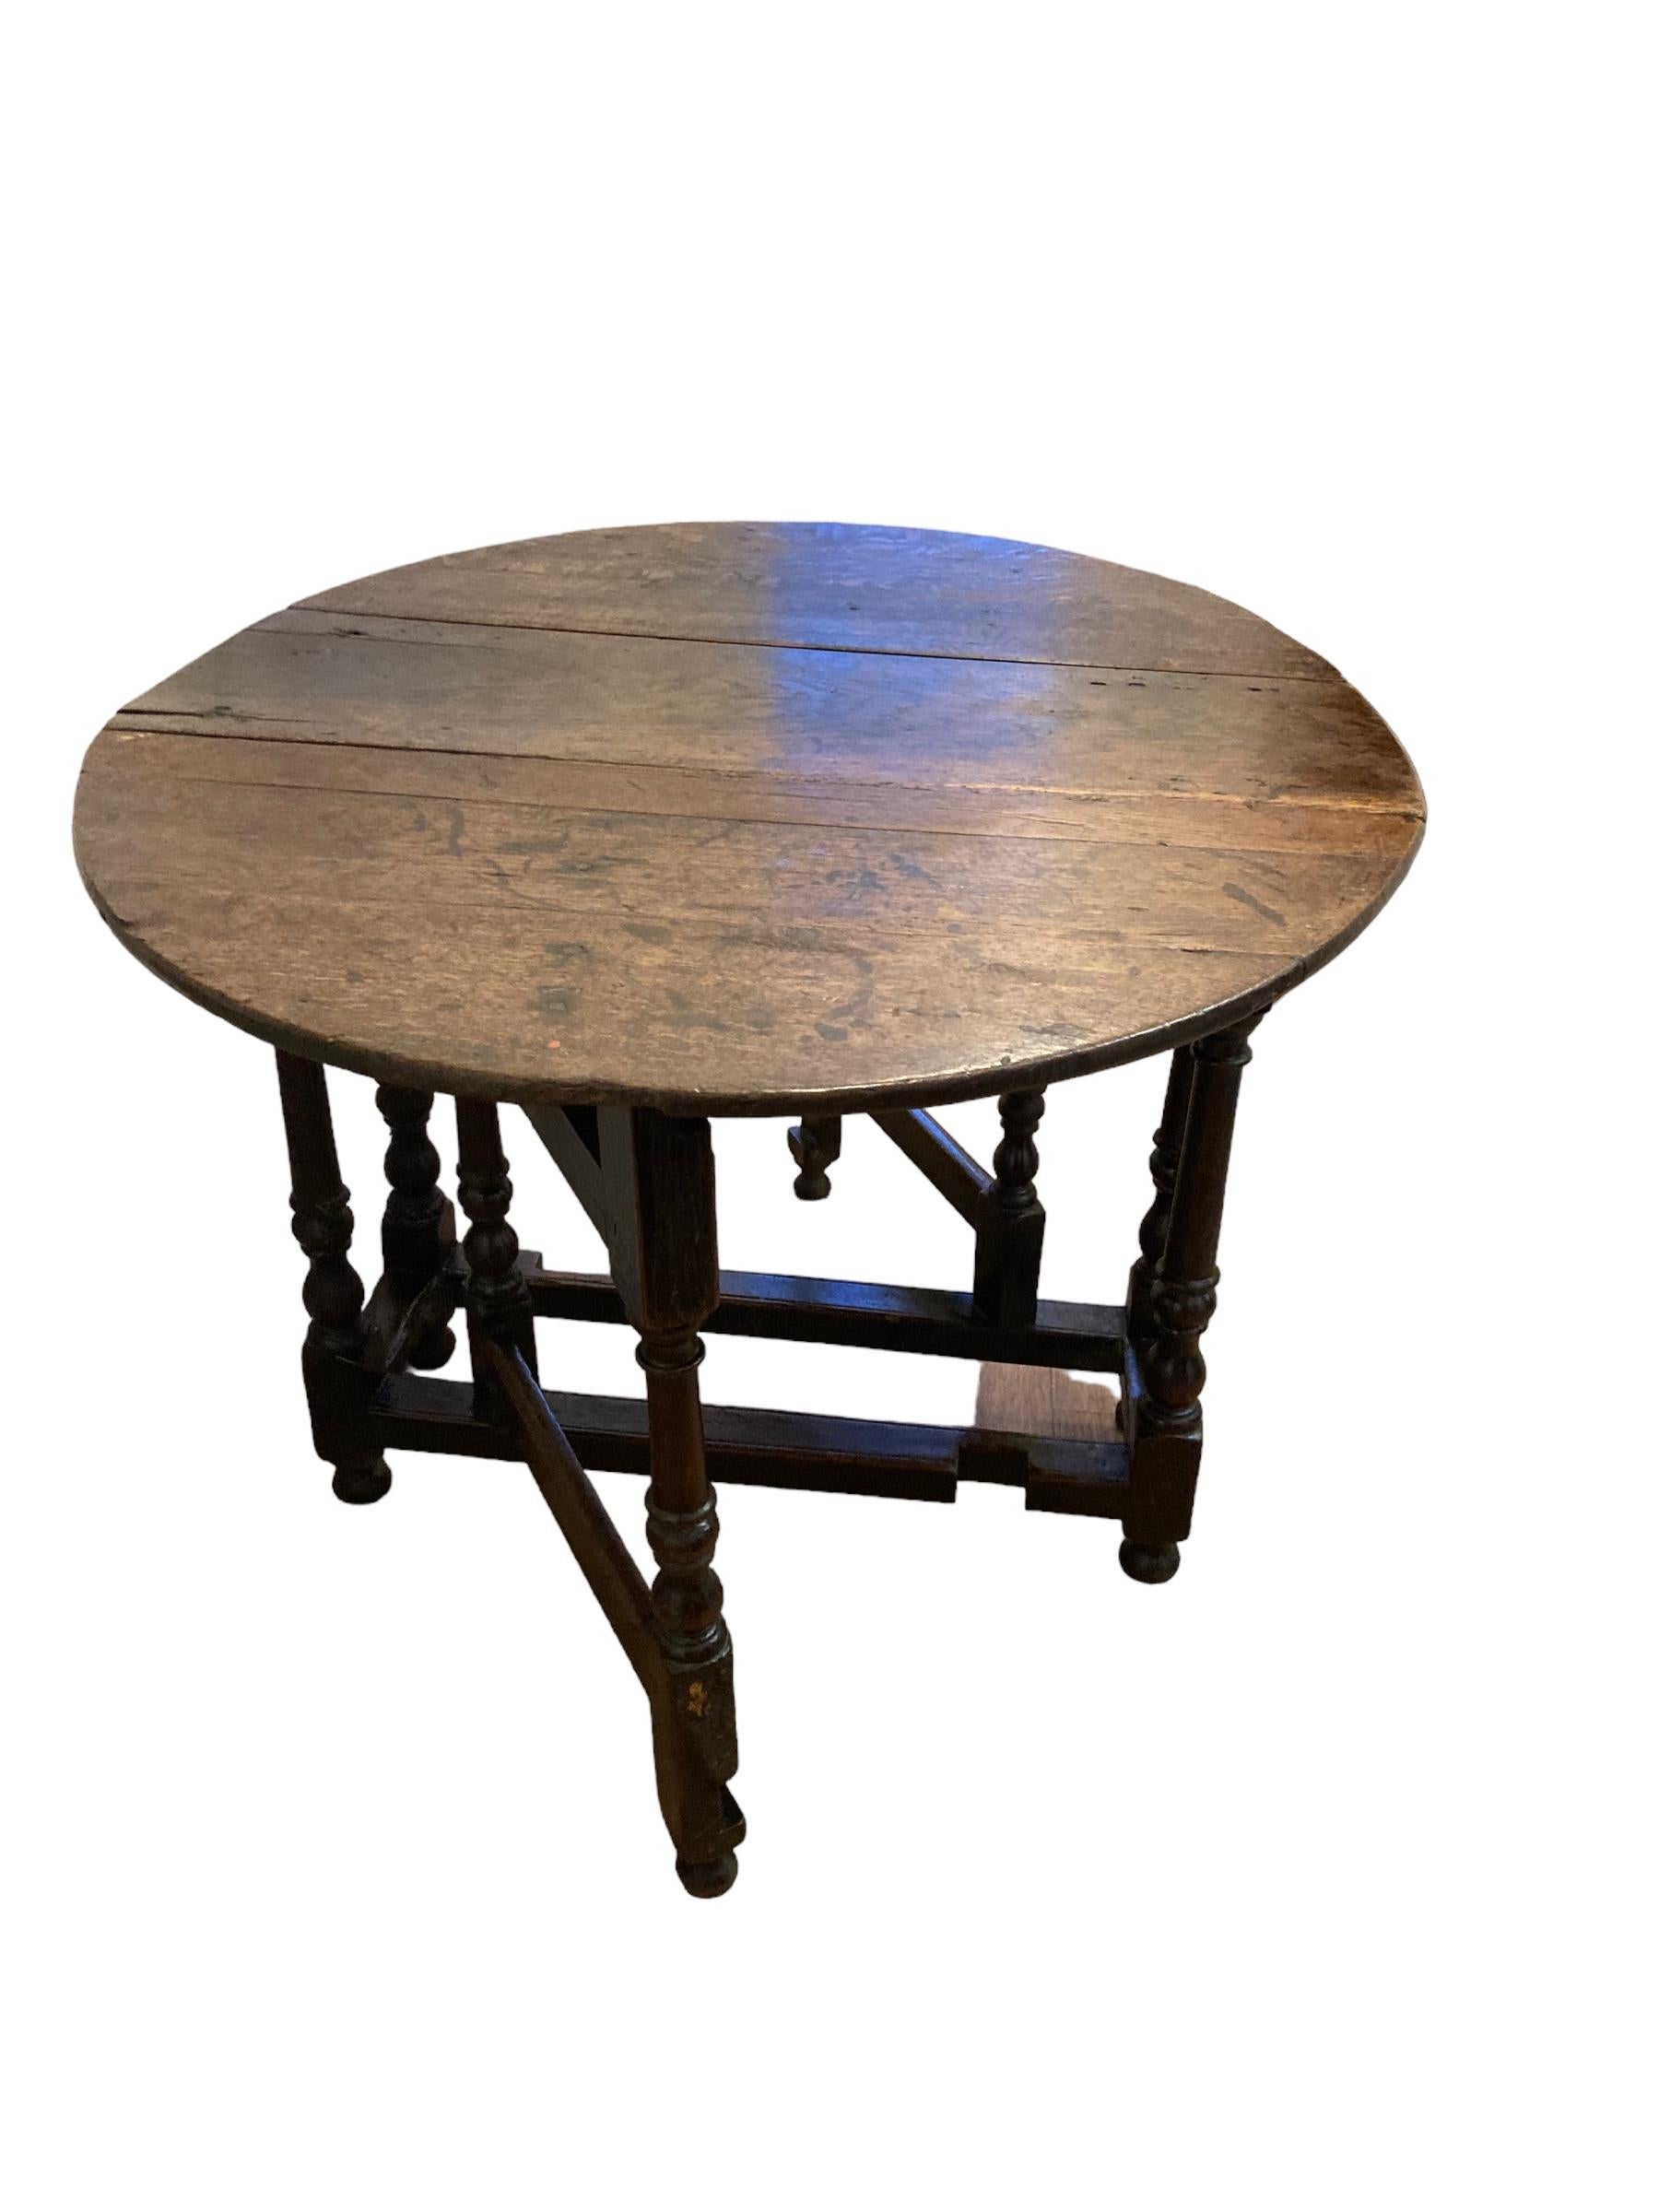 Antique English 18th Century Oak Gate Leg drop leaf Table, on turned column legs. A single draw on one side with round knob handle. This piece is both practical, ornate and a solid item of furniture has 250 years of history in its apearance.

H: 72